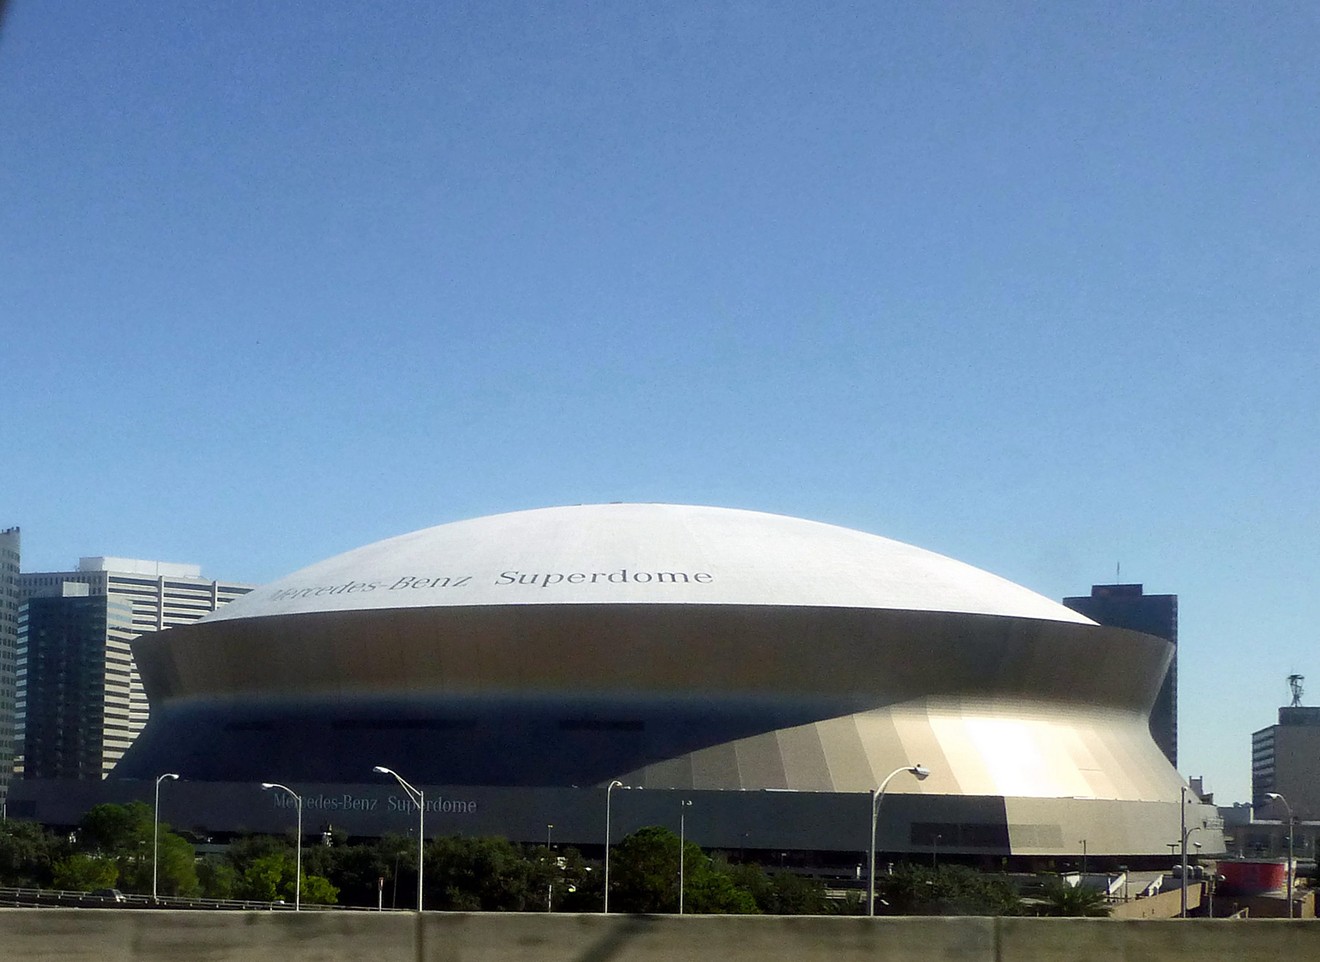 The Mercedes-Benz Superdome was the scene of a robbery on Sunday.